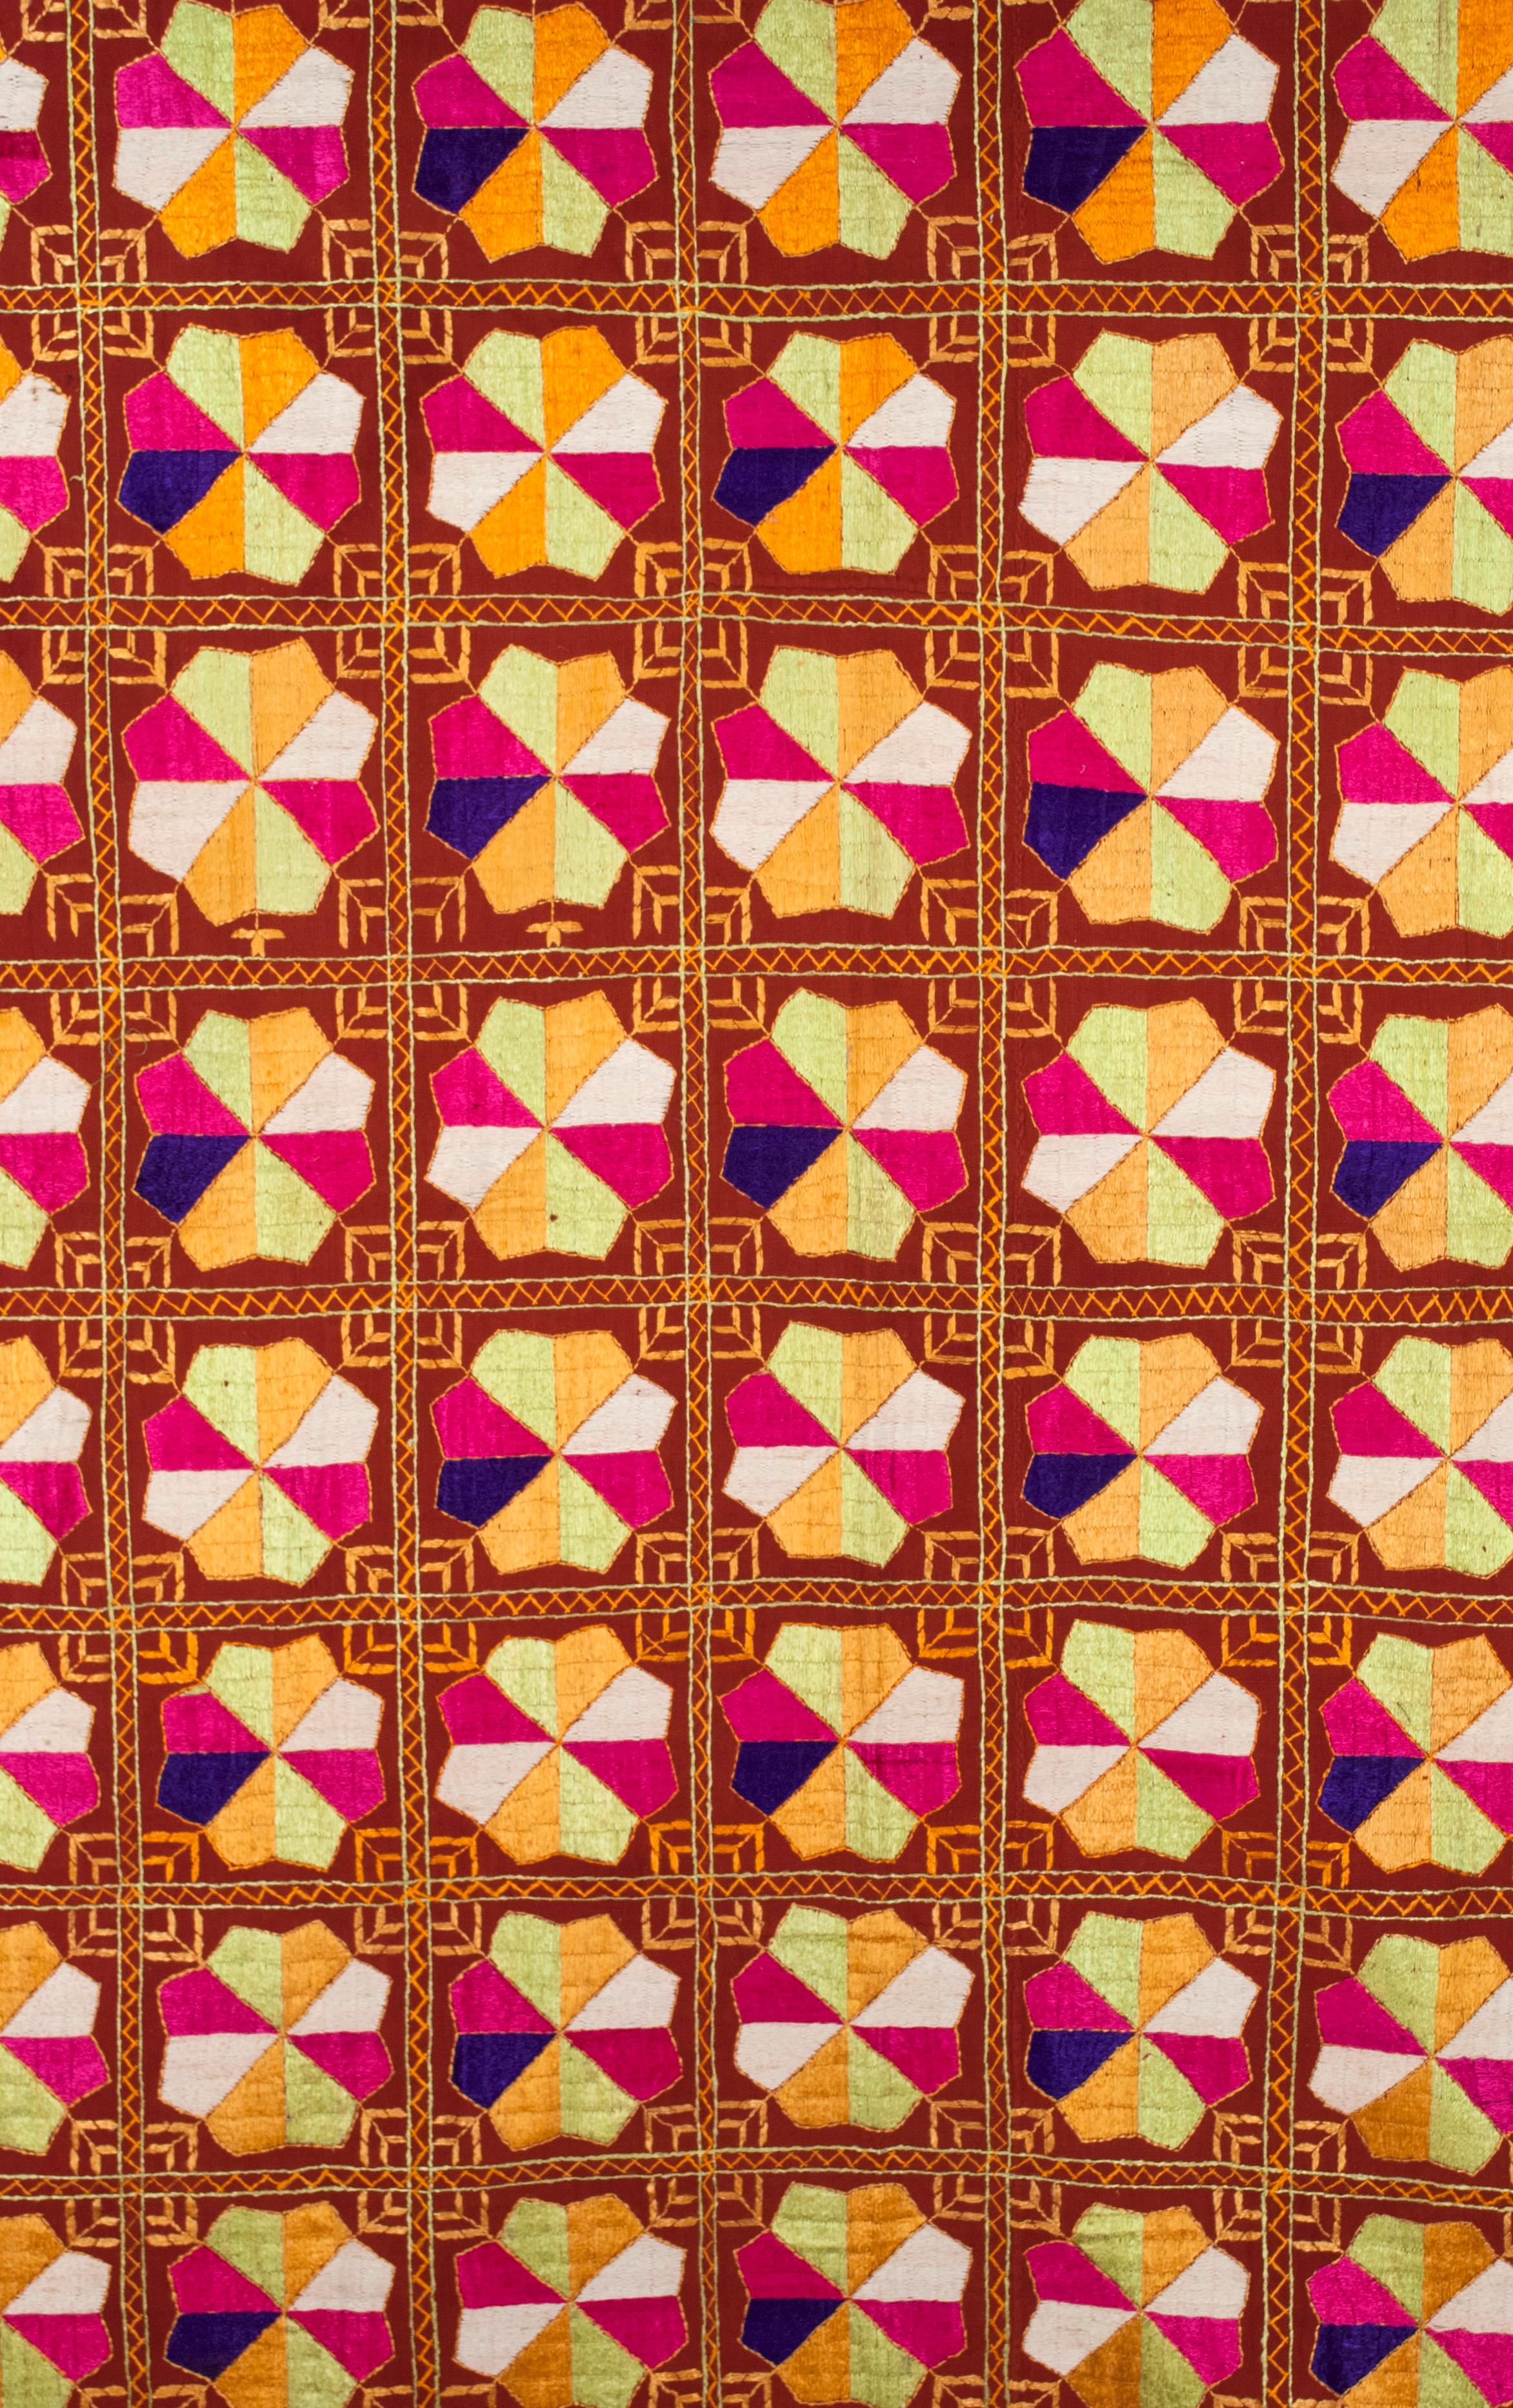 1st Half 20th Century Indian Woman’s Shawl / Phulkari

This large vibrant woman’s shawl is almost completely covered with dense silk-floss embroidery on a sturdy cotton 'khaddar' ground cloth. From east Punjab, north India.







 